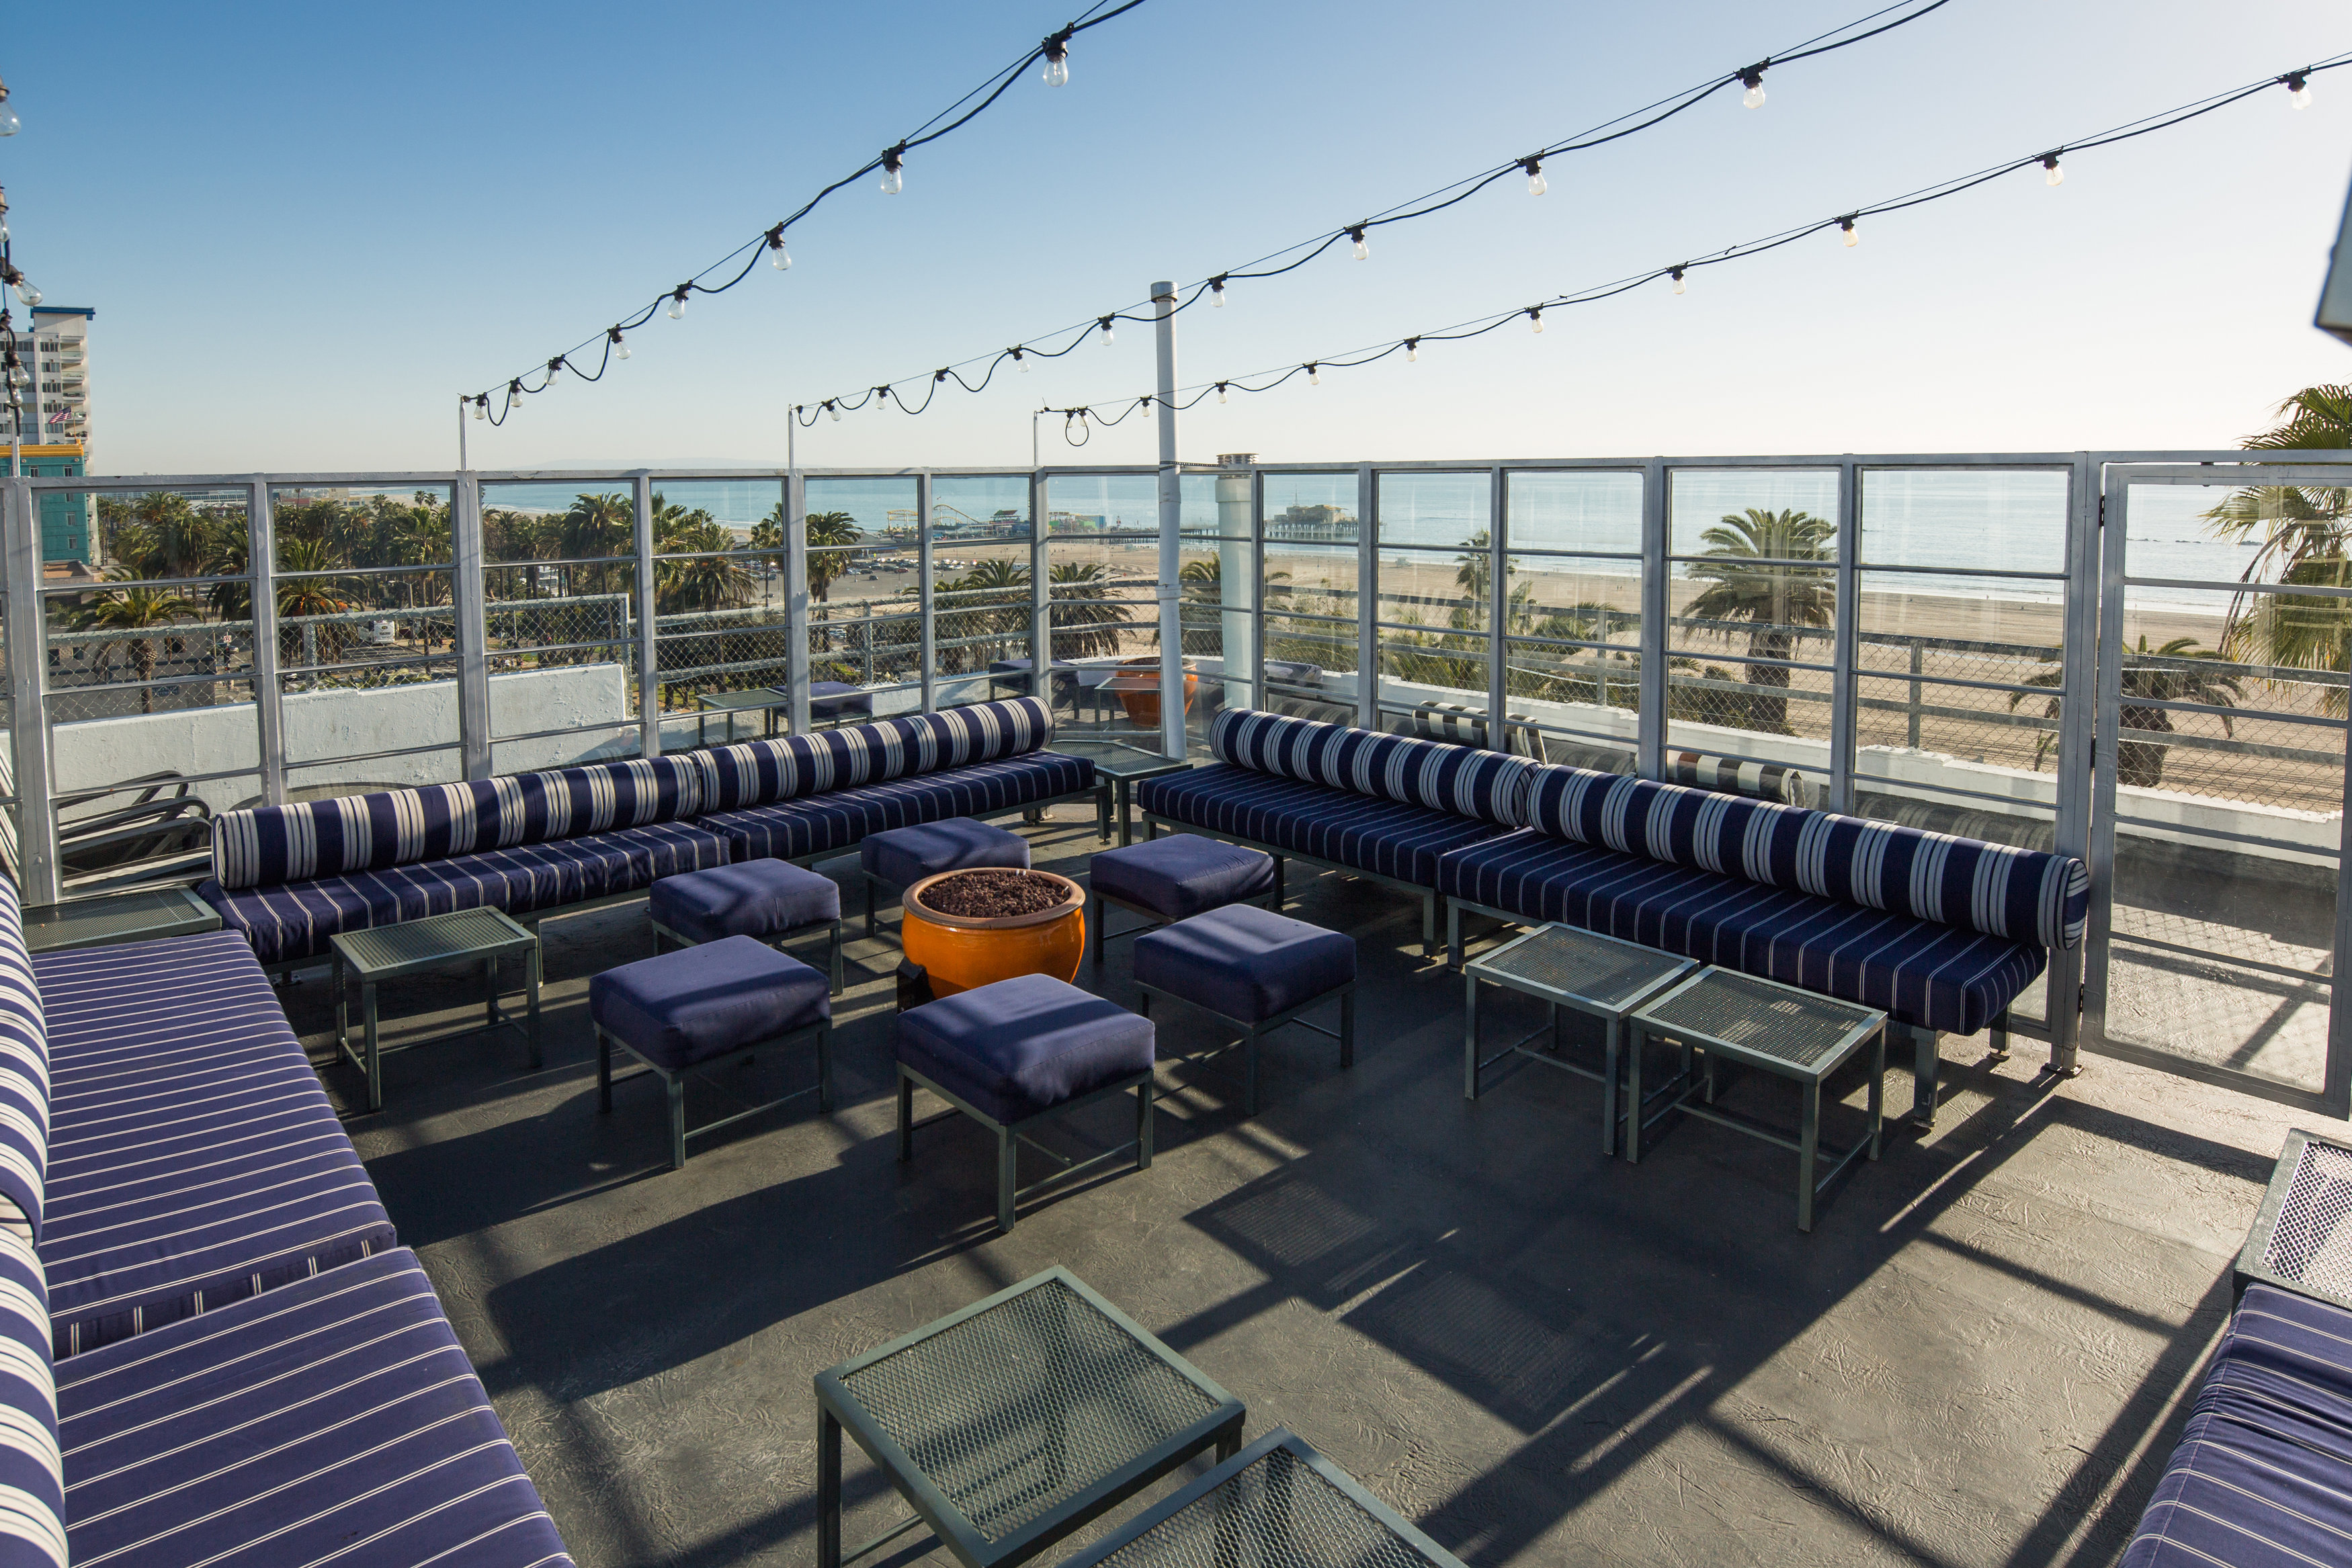 Penthouse Suite 700 Rooftop bar and lounge with 180 degree views of the Pacific